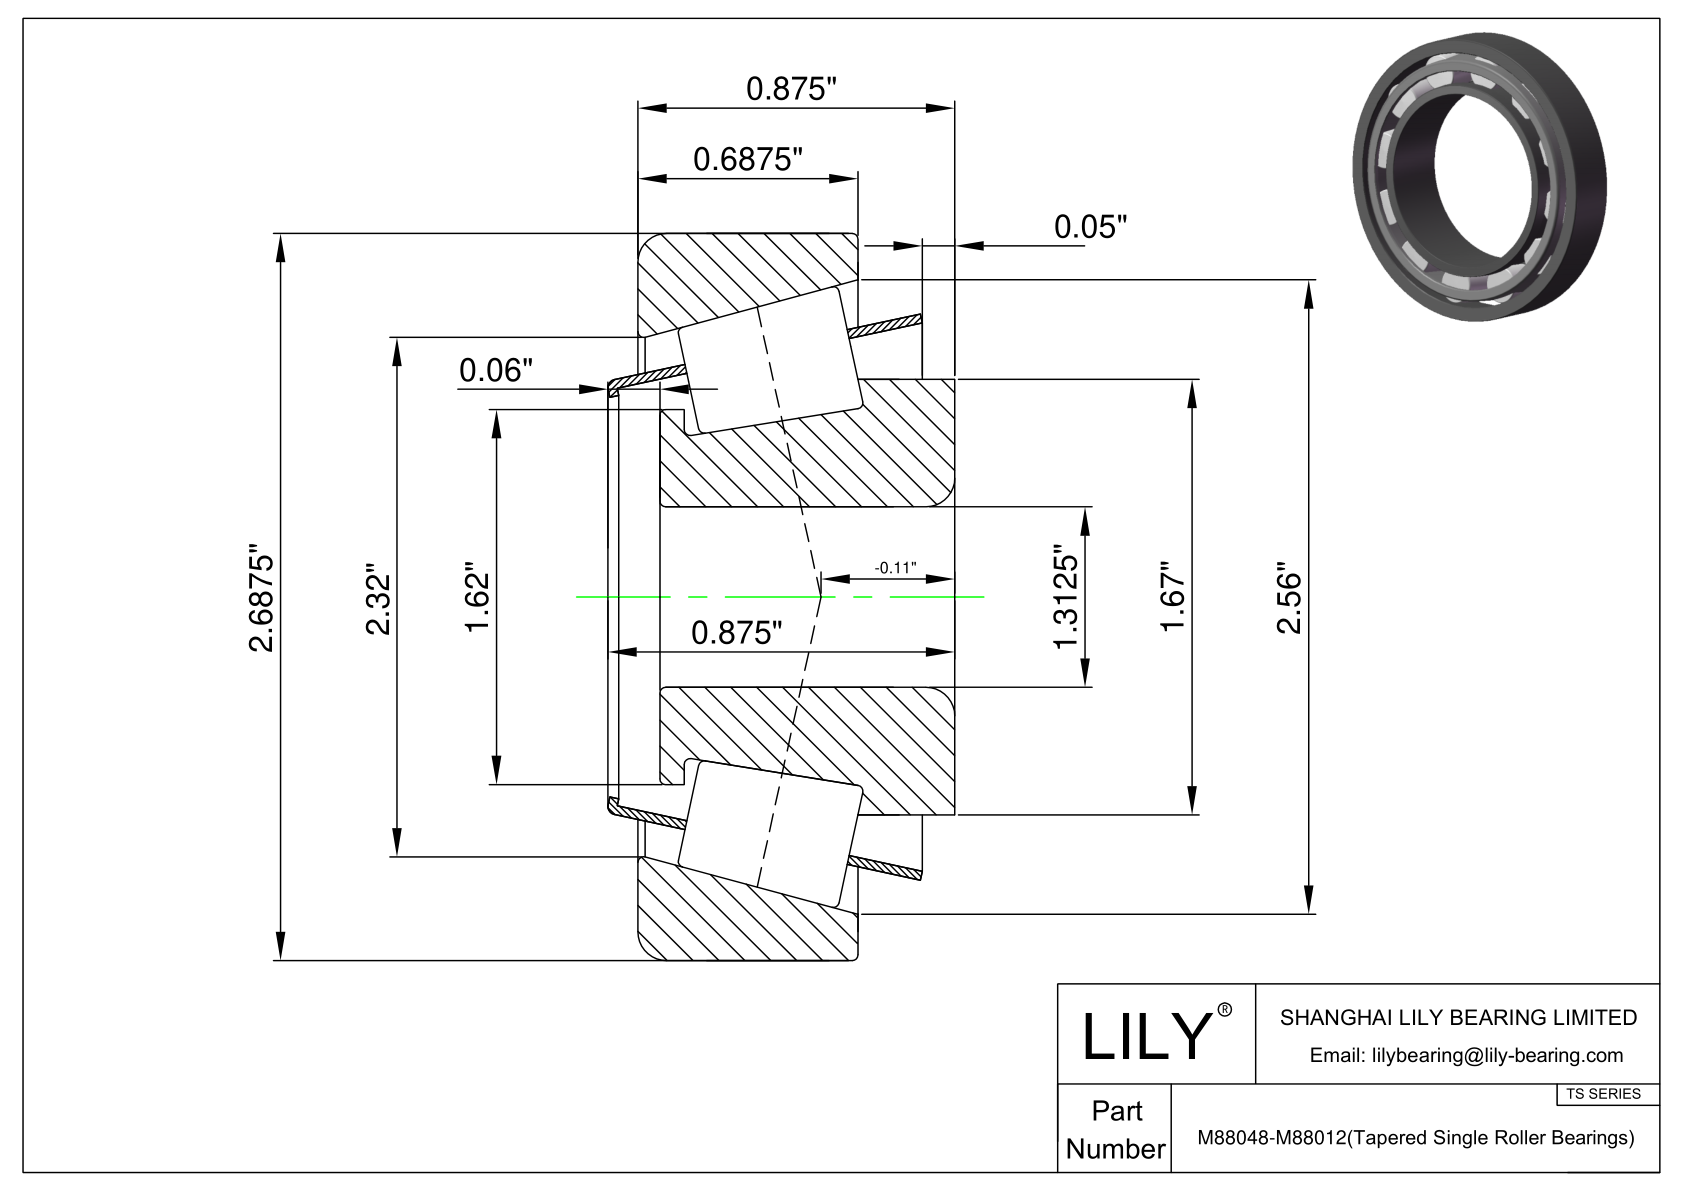 M88048-M88012 TS (Tapered Single Roller Bearings) (Imperial) cad drawing